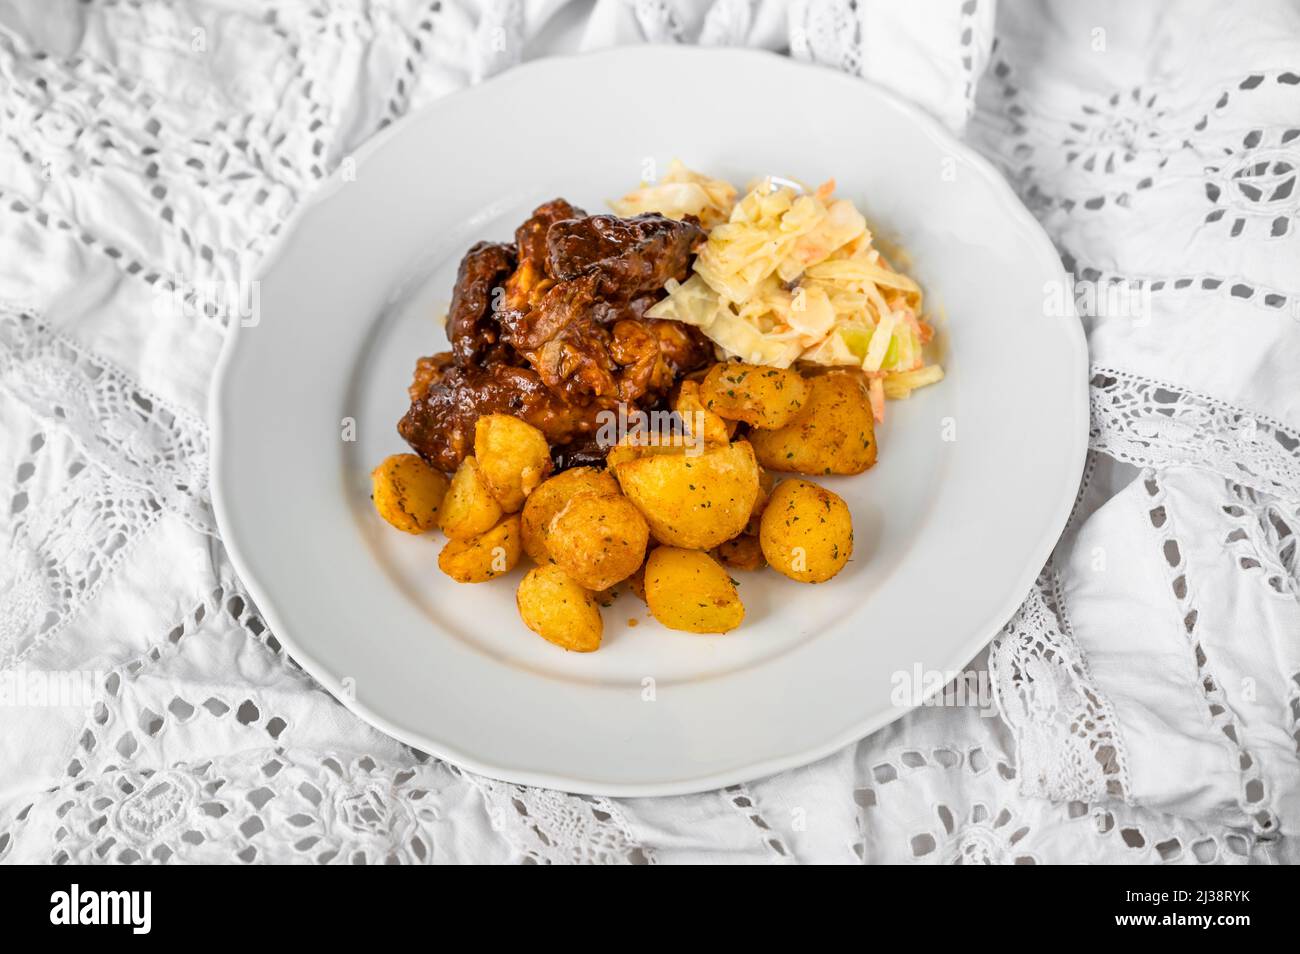 Baked sliced turkey meat in wild gypsy sauce, fried potato and salad coleslaw on white plate on white lace tablecloth. Stock Photo